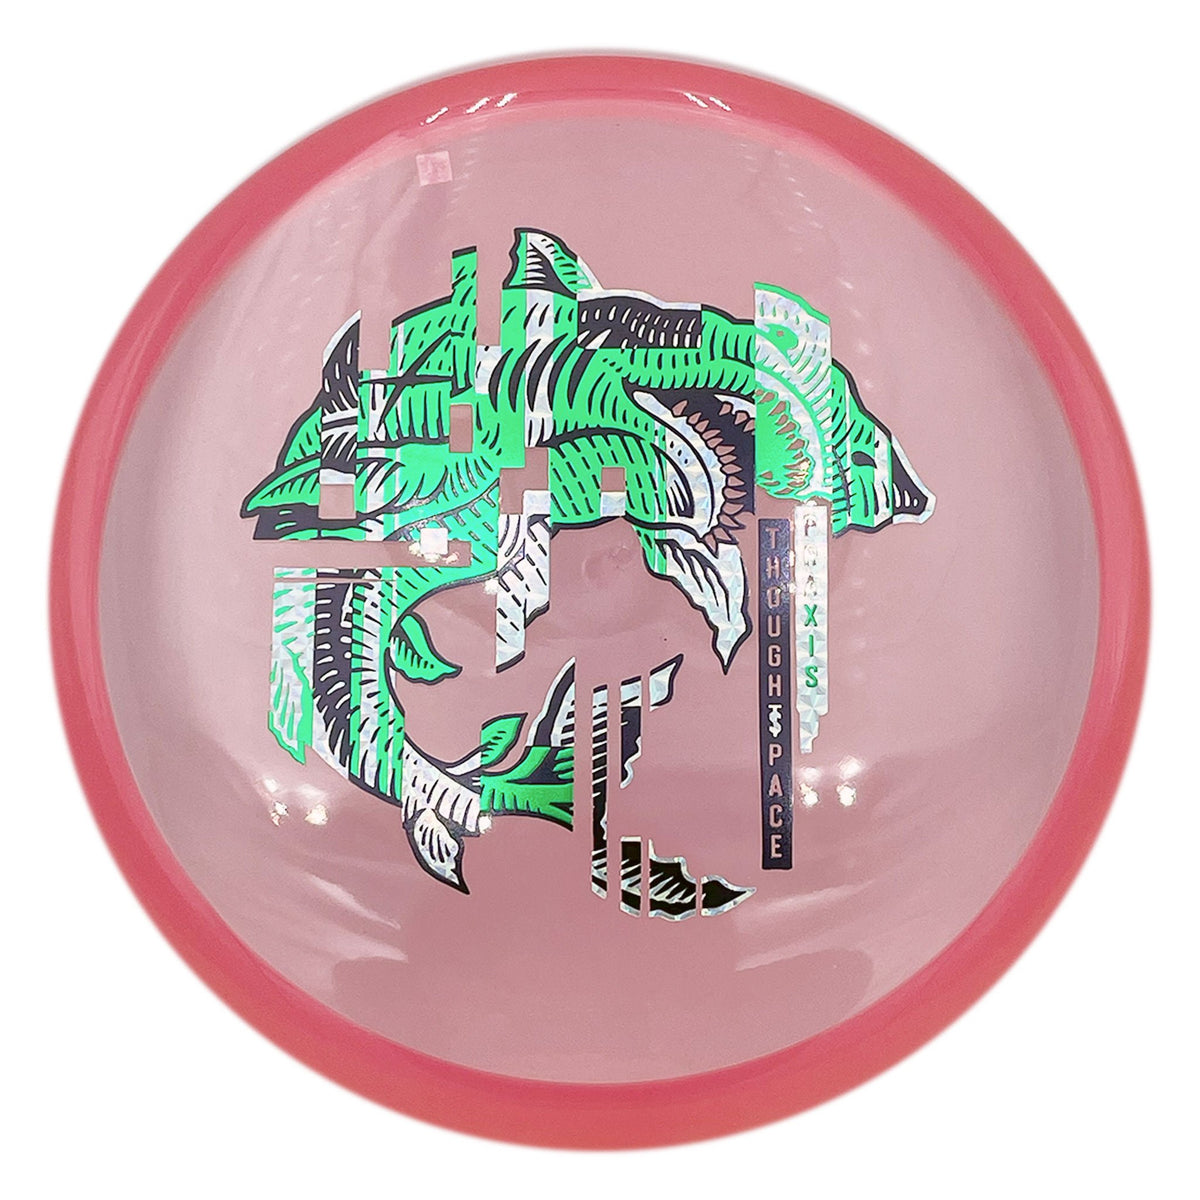 Thought Space Athletics Ethos Praxis Putter - Pink / Green